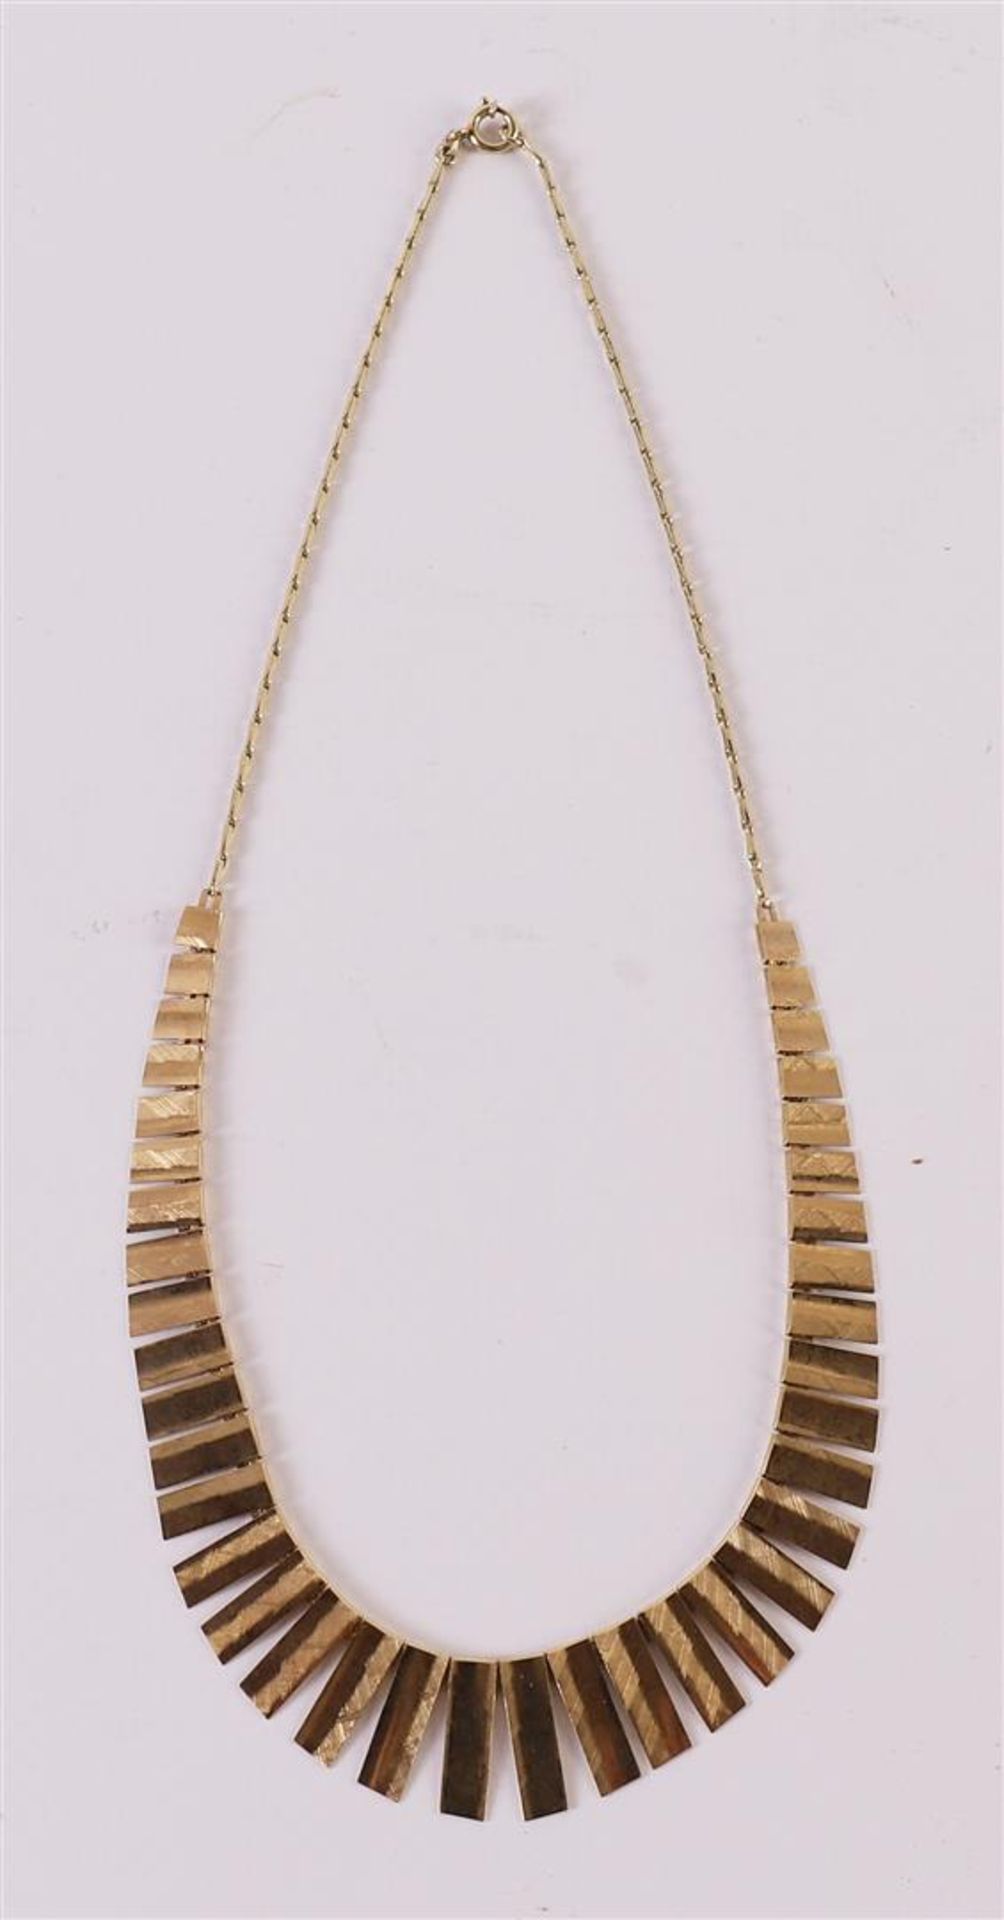 A 14 kt 585/1000 yellow gold, partly matted, choker, length 44 cm, 18.7 grams. - Image 2 of 2